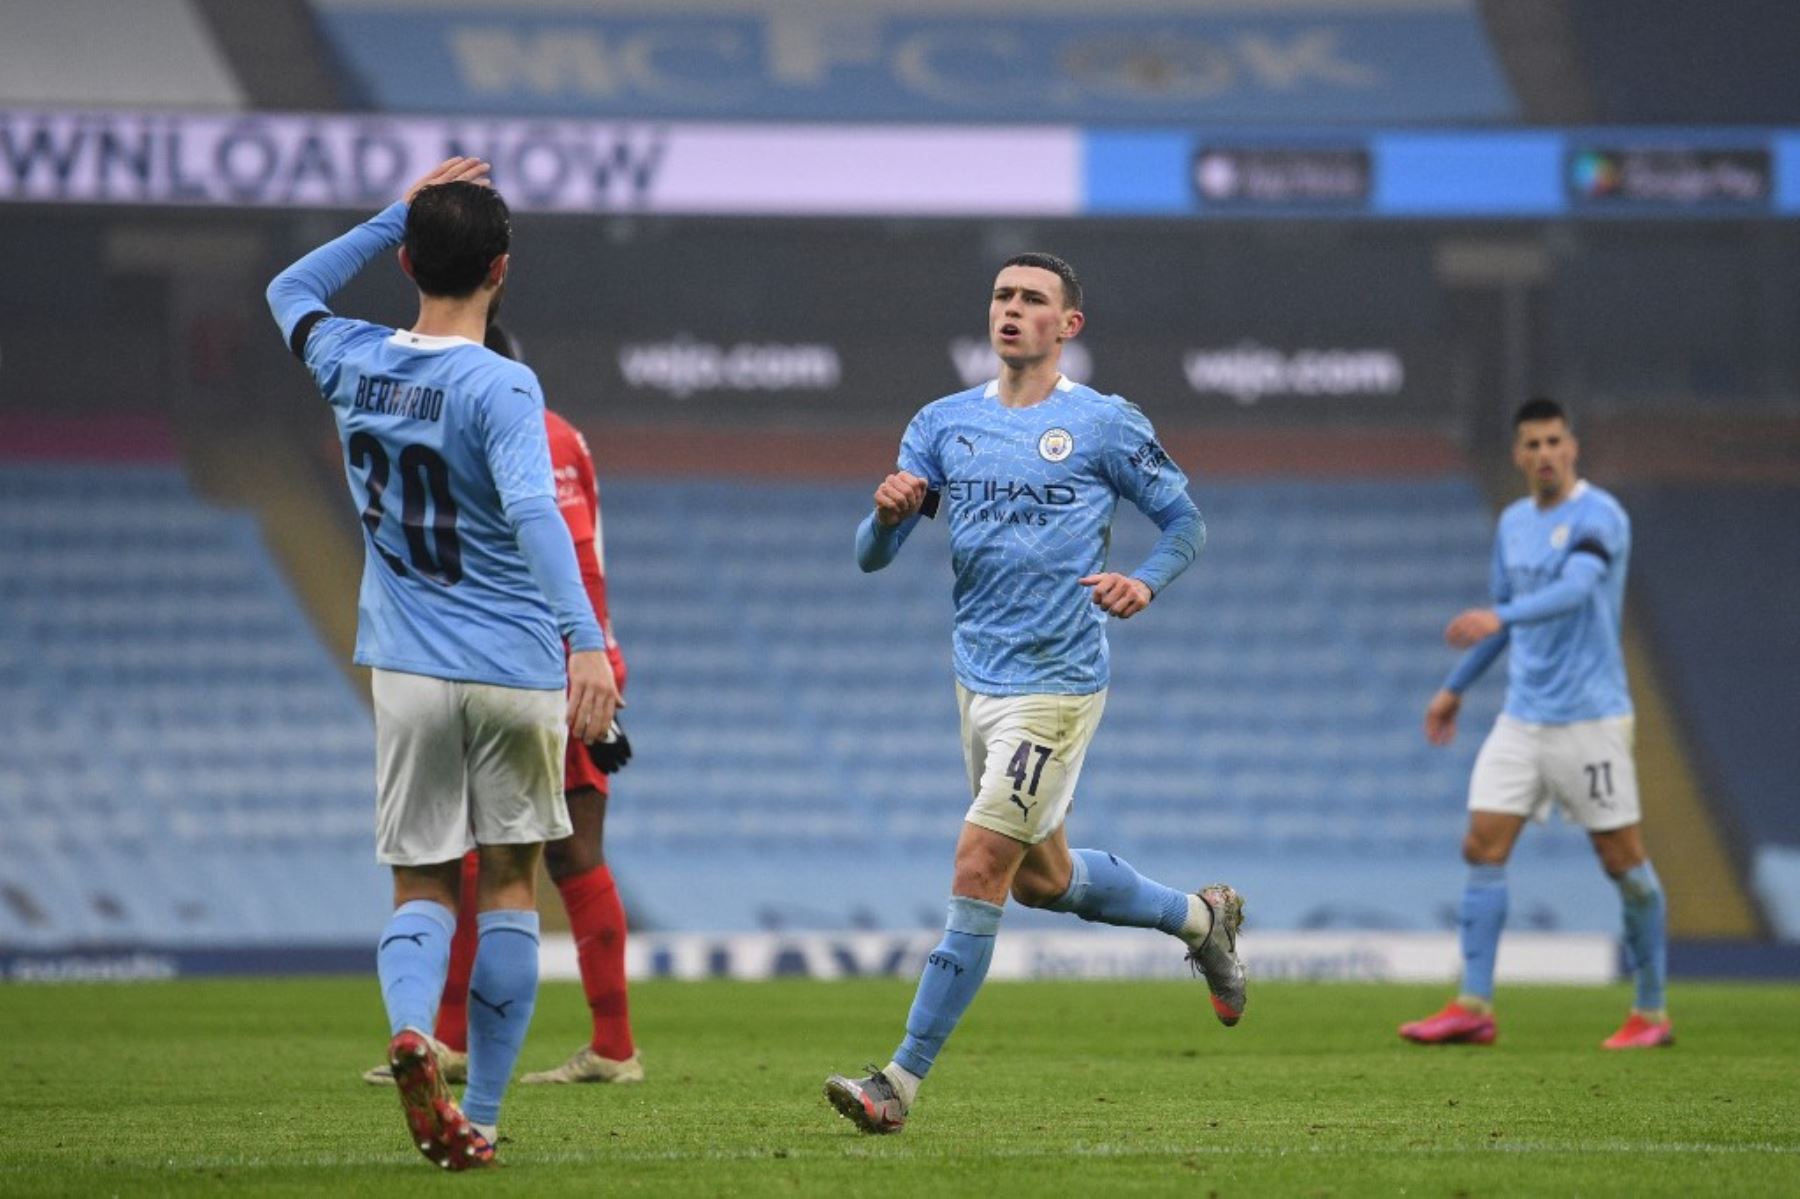 Manchester City sigue imparable